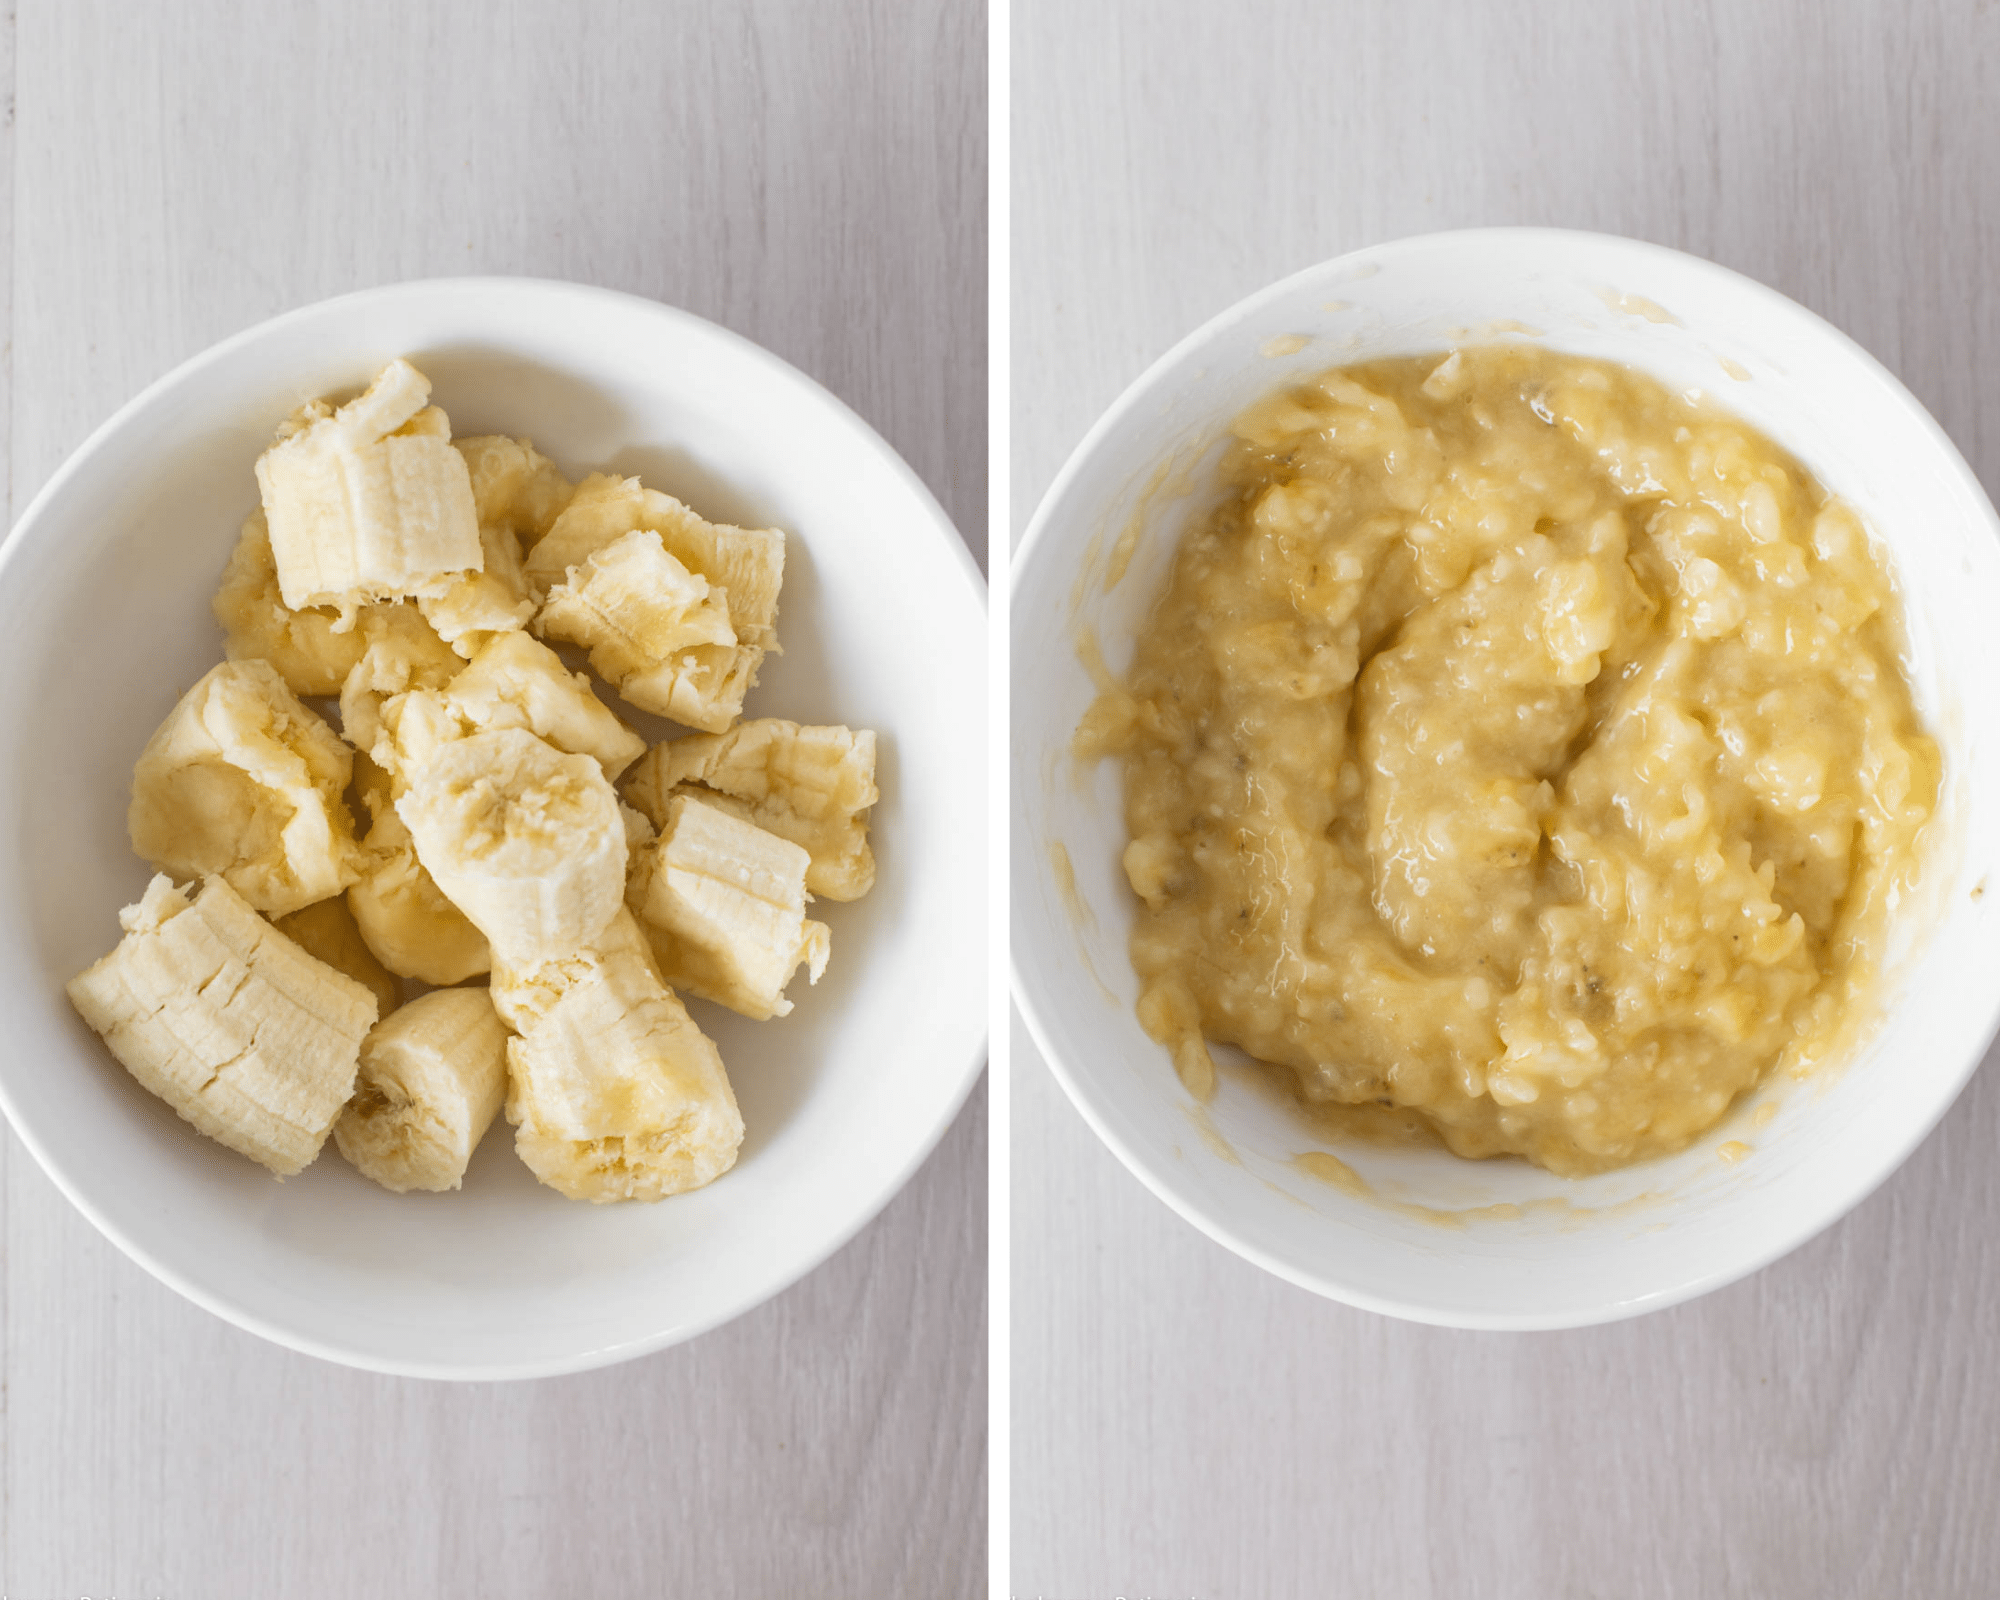 Mashing the bananas before and after